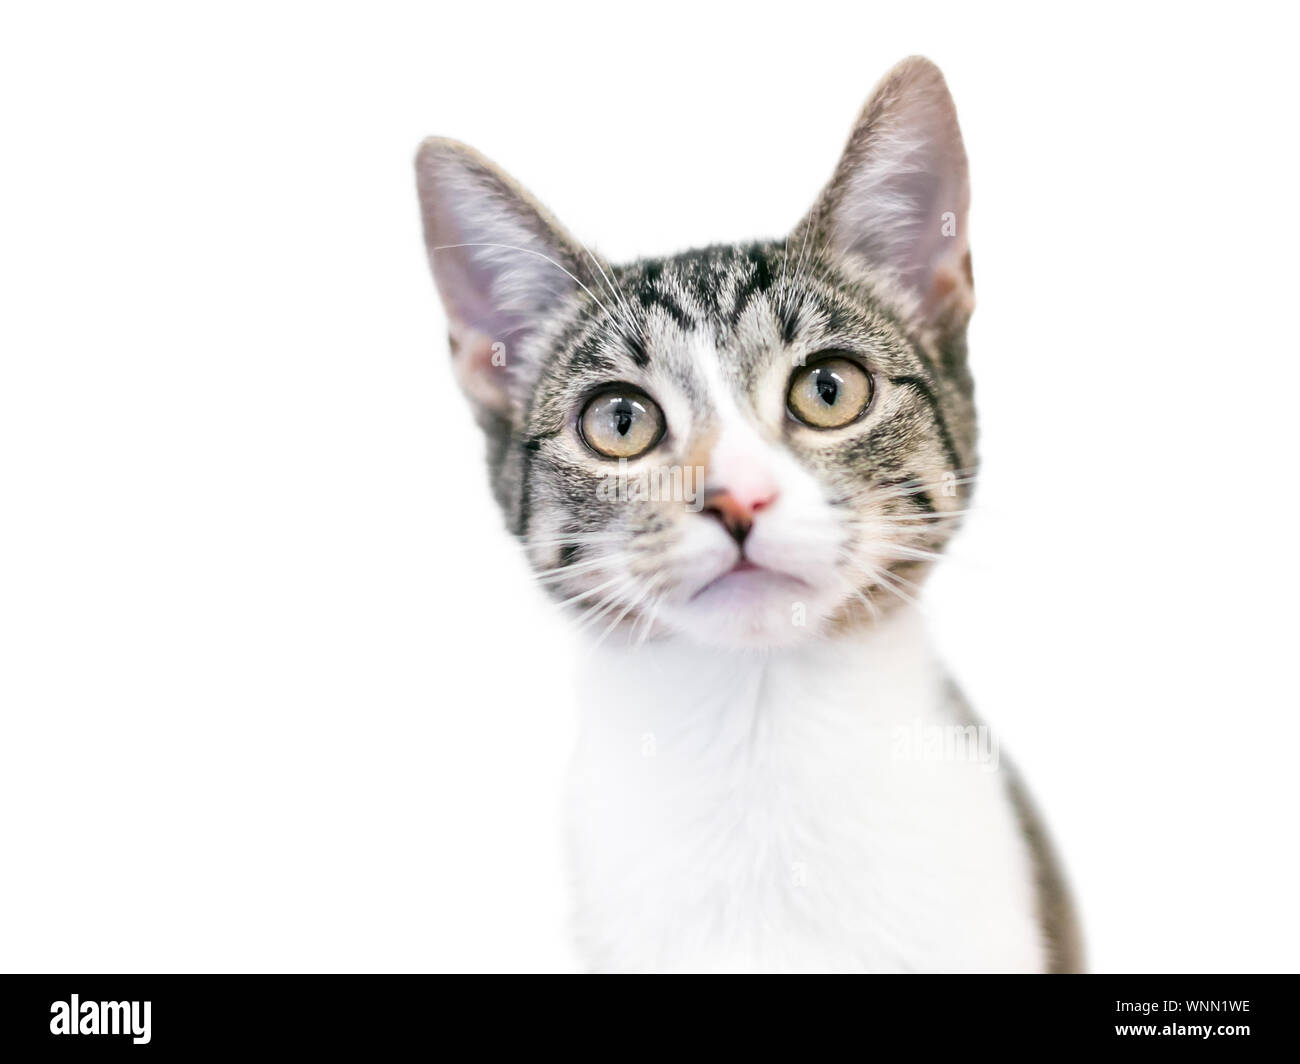 A cute domestic shorthair kitten with tabby and white markings Stock Photo